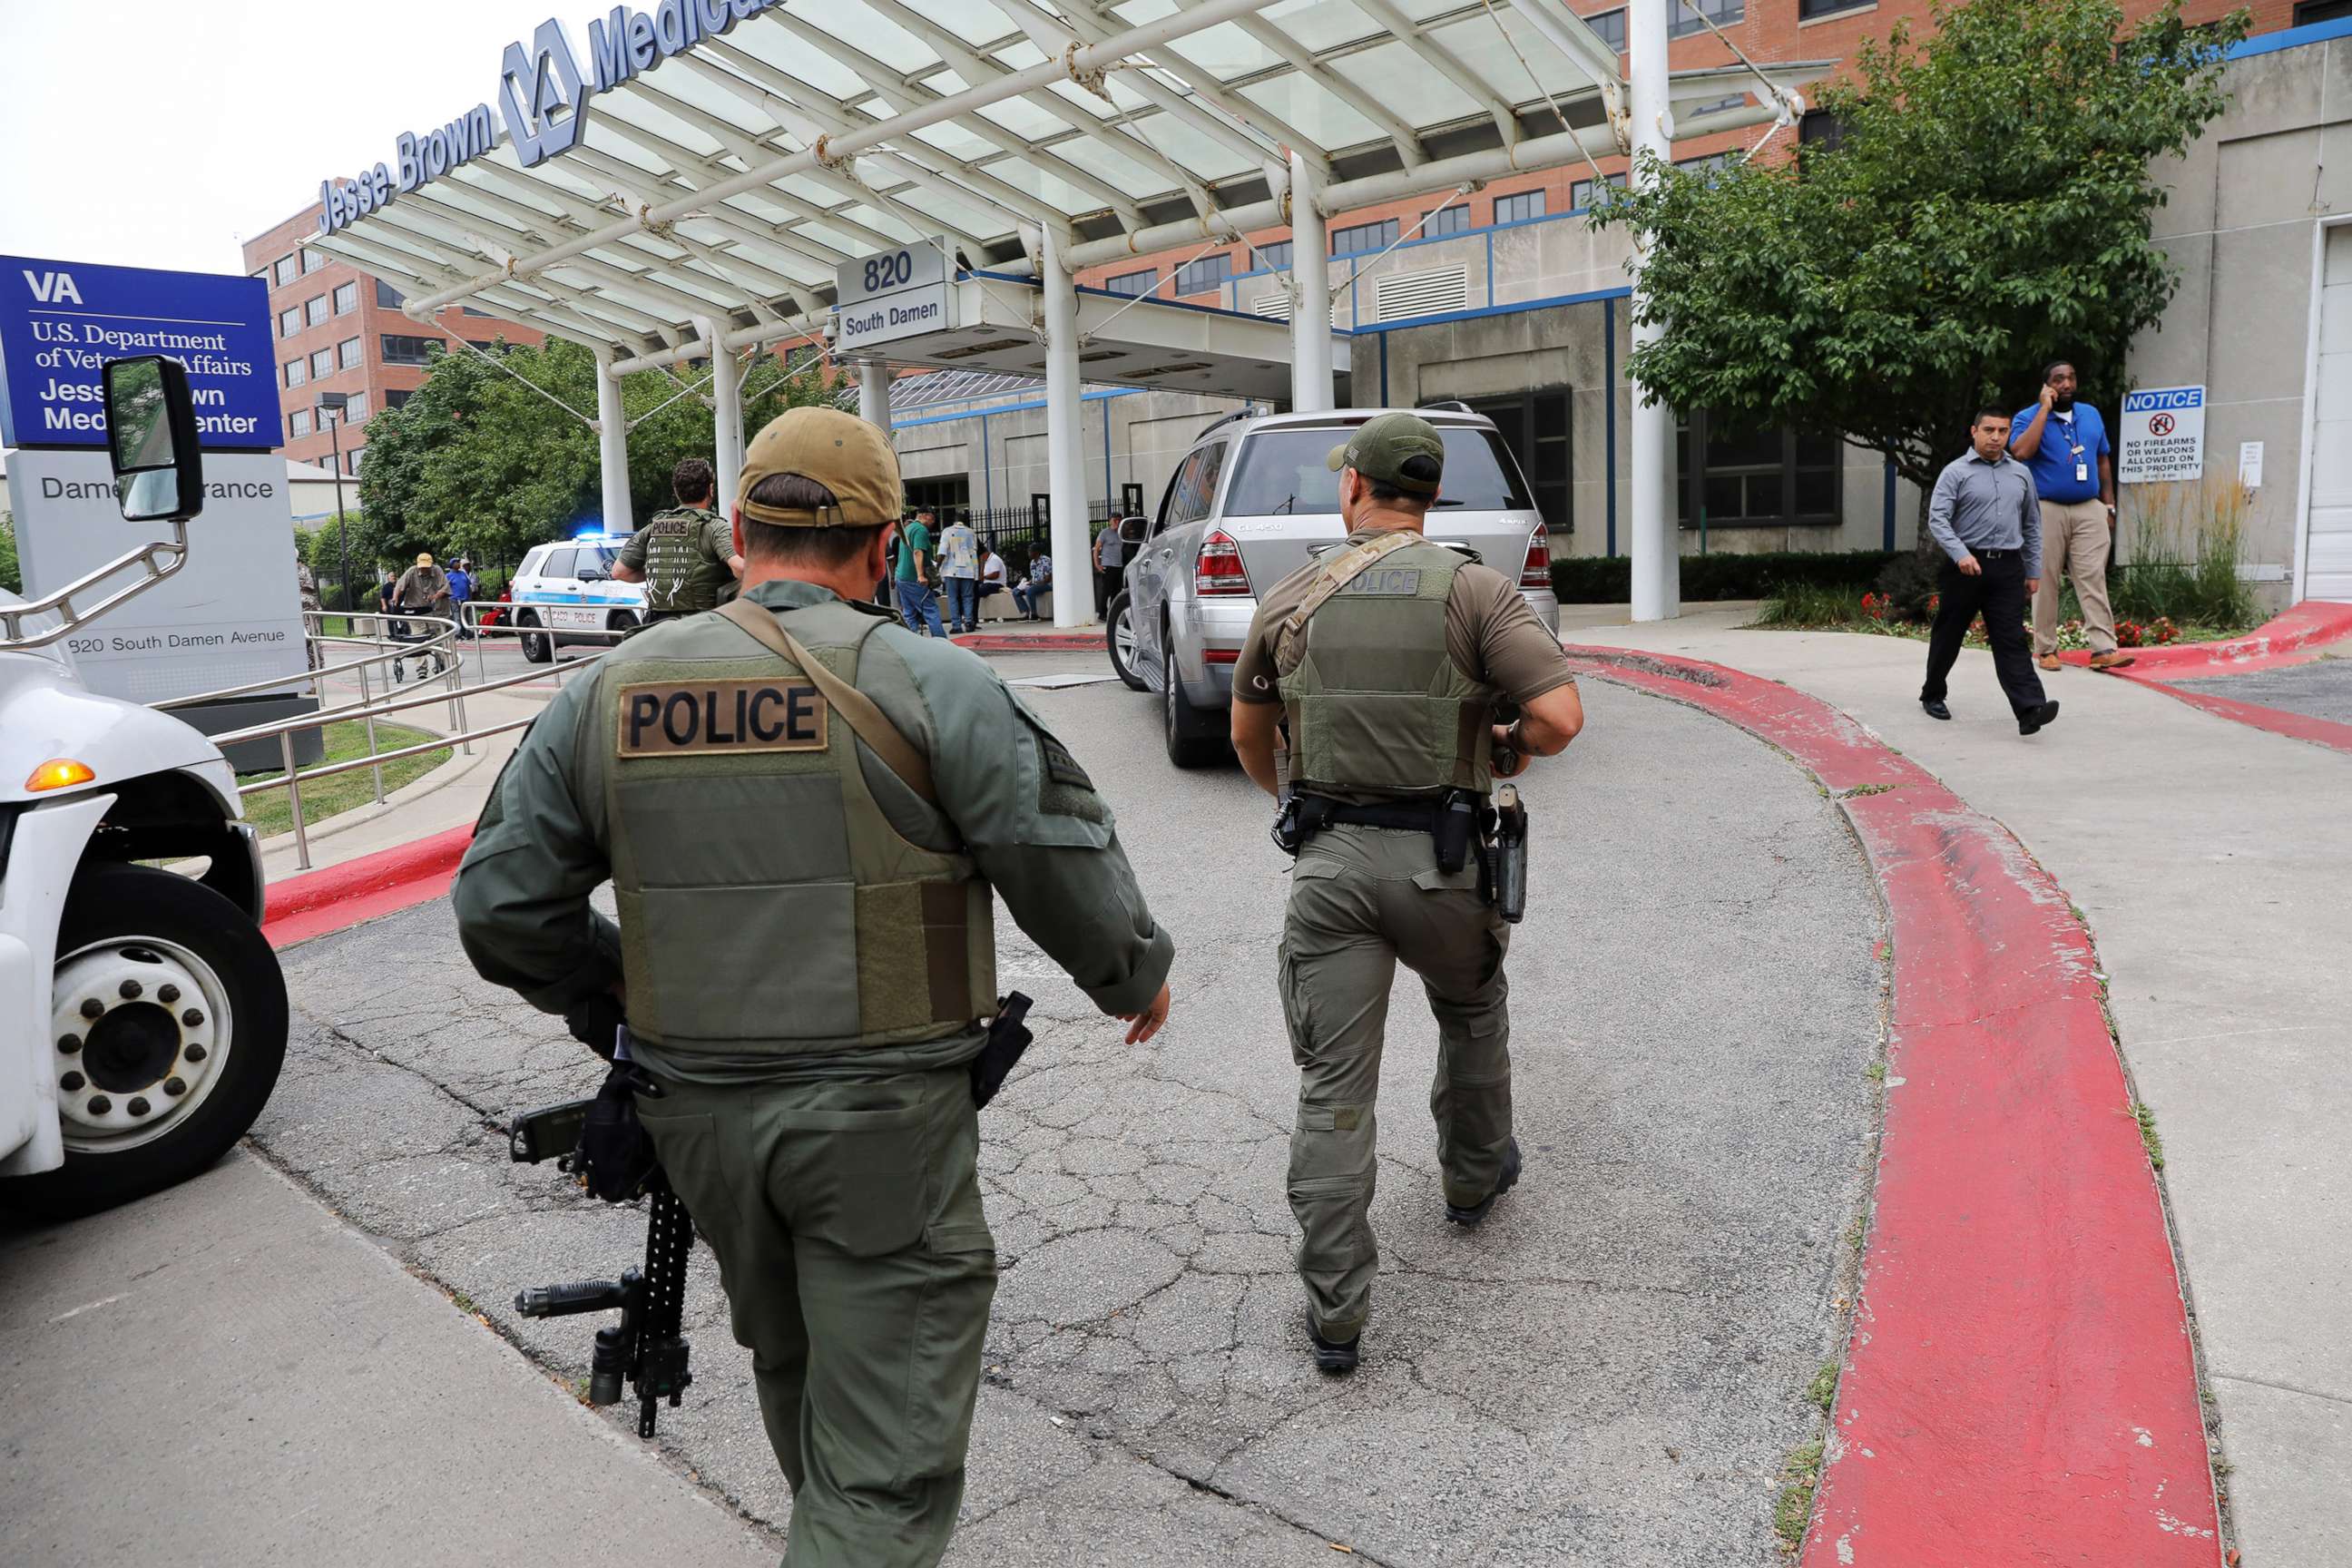 PHOTO: Police officers enter Jesse Brown VA Medical Center after reports of possible shots fired inside the hospital, Aug. 12, 2019 in Chicago.